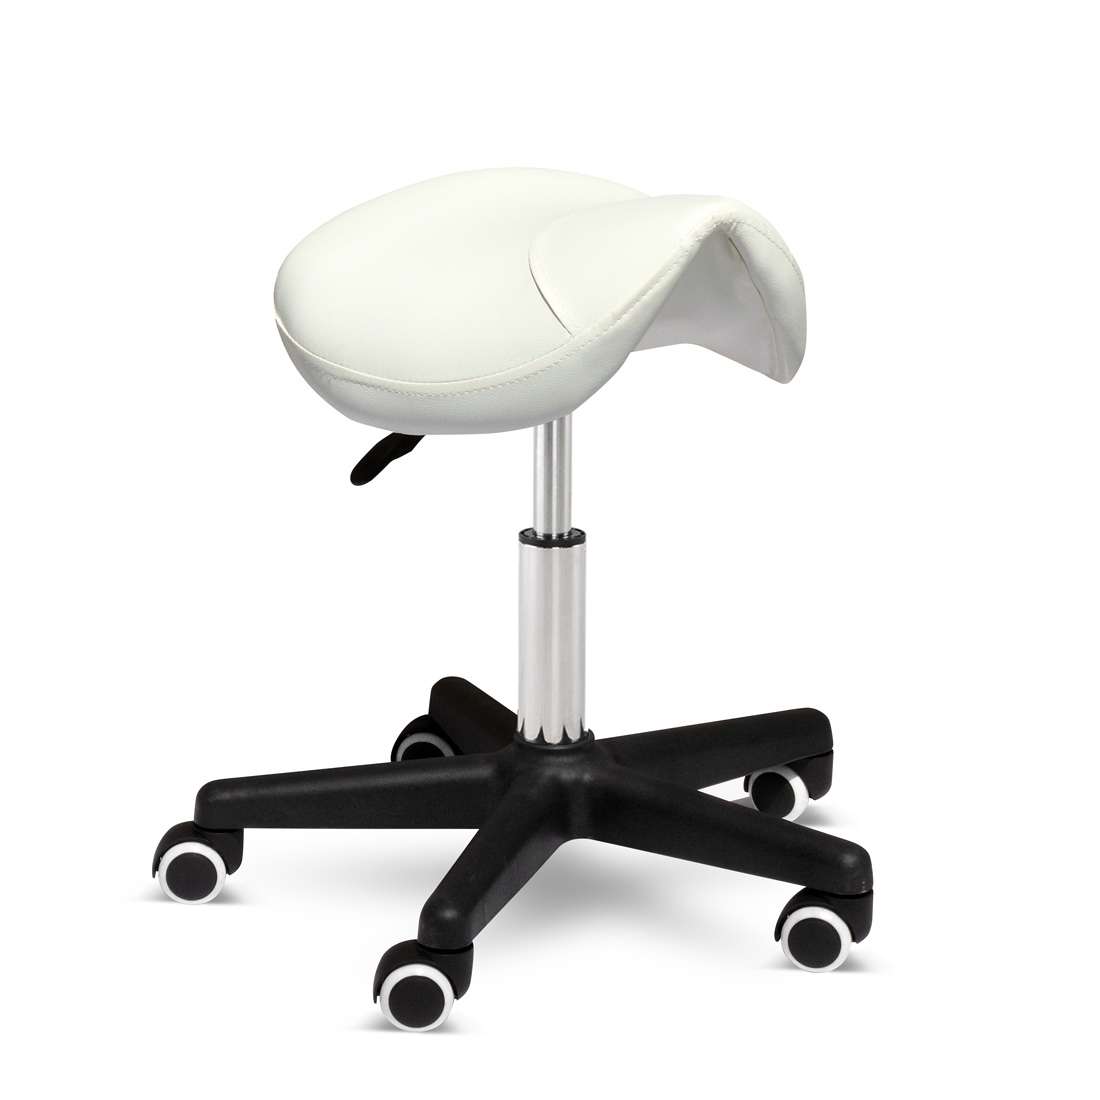 Professional Stool With Wheels Adjustable Height Saddle Seat ProFESSIONAL